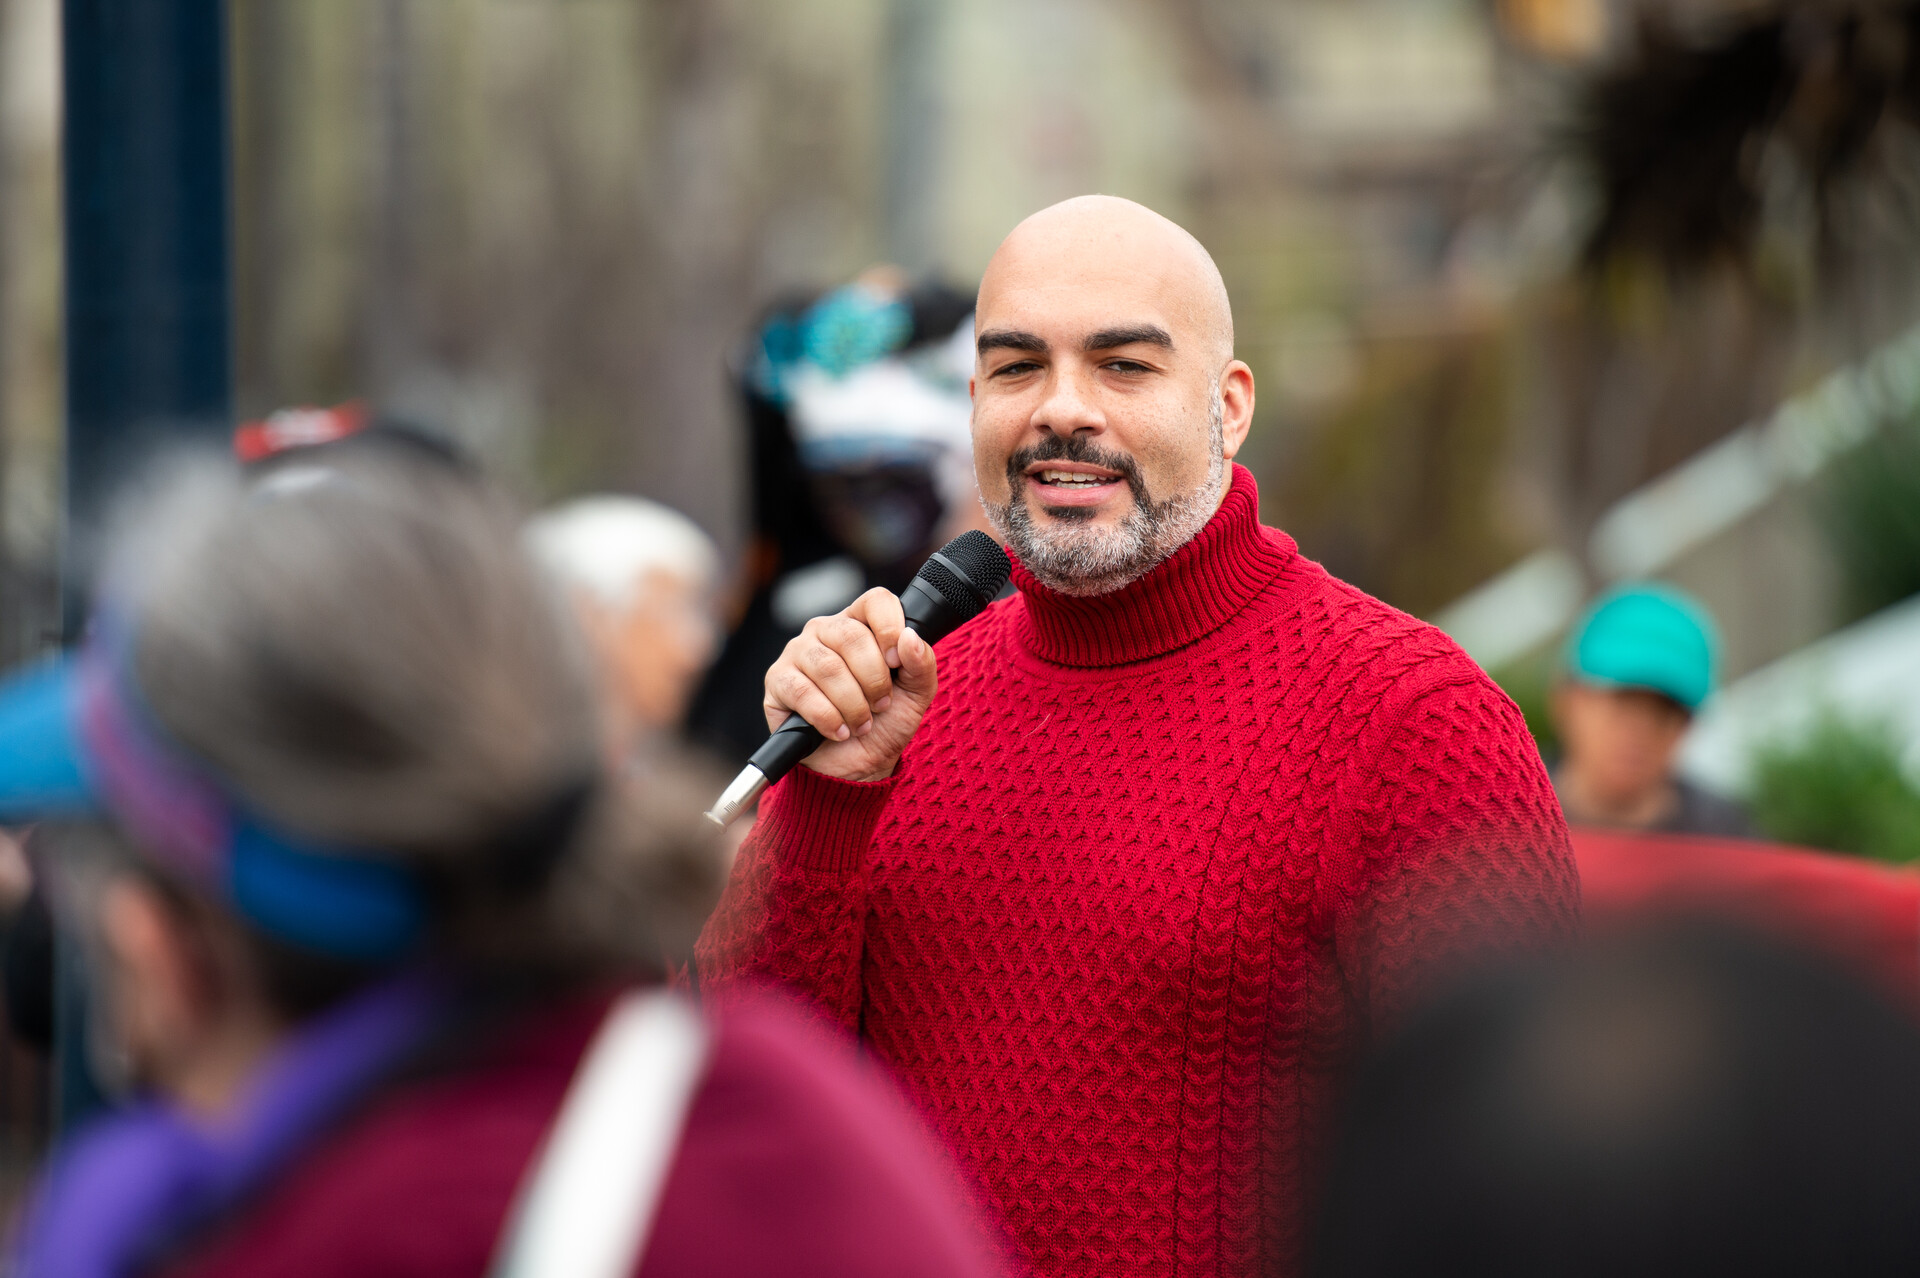 A bald man with a salt and pepper beard and red sweater holds a microphone whiel standing among a crowd, outside. 